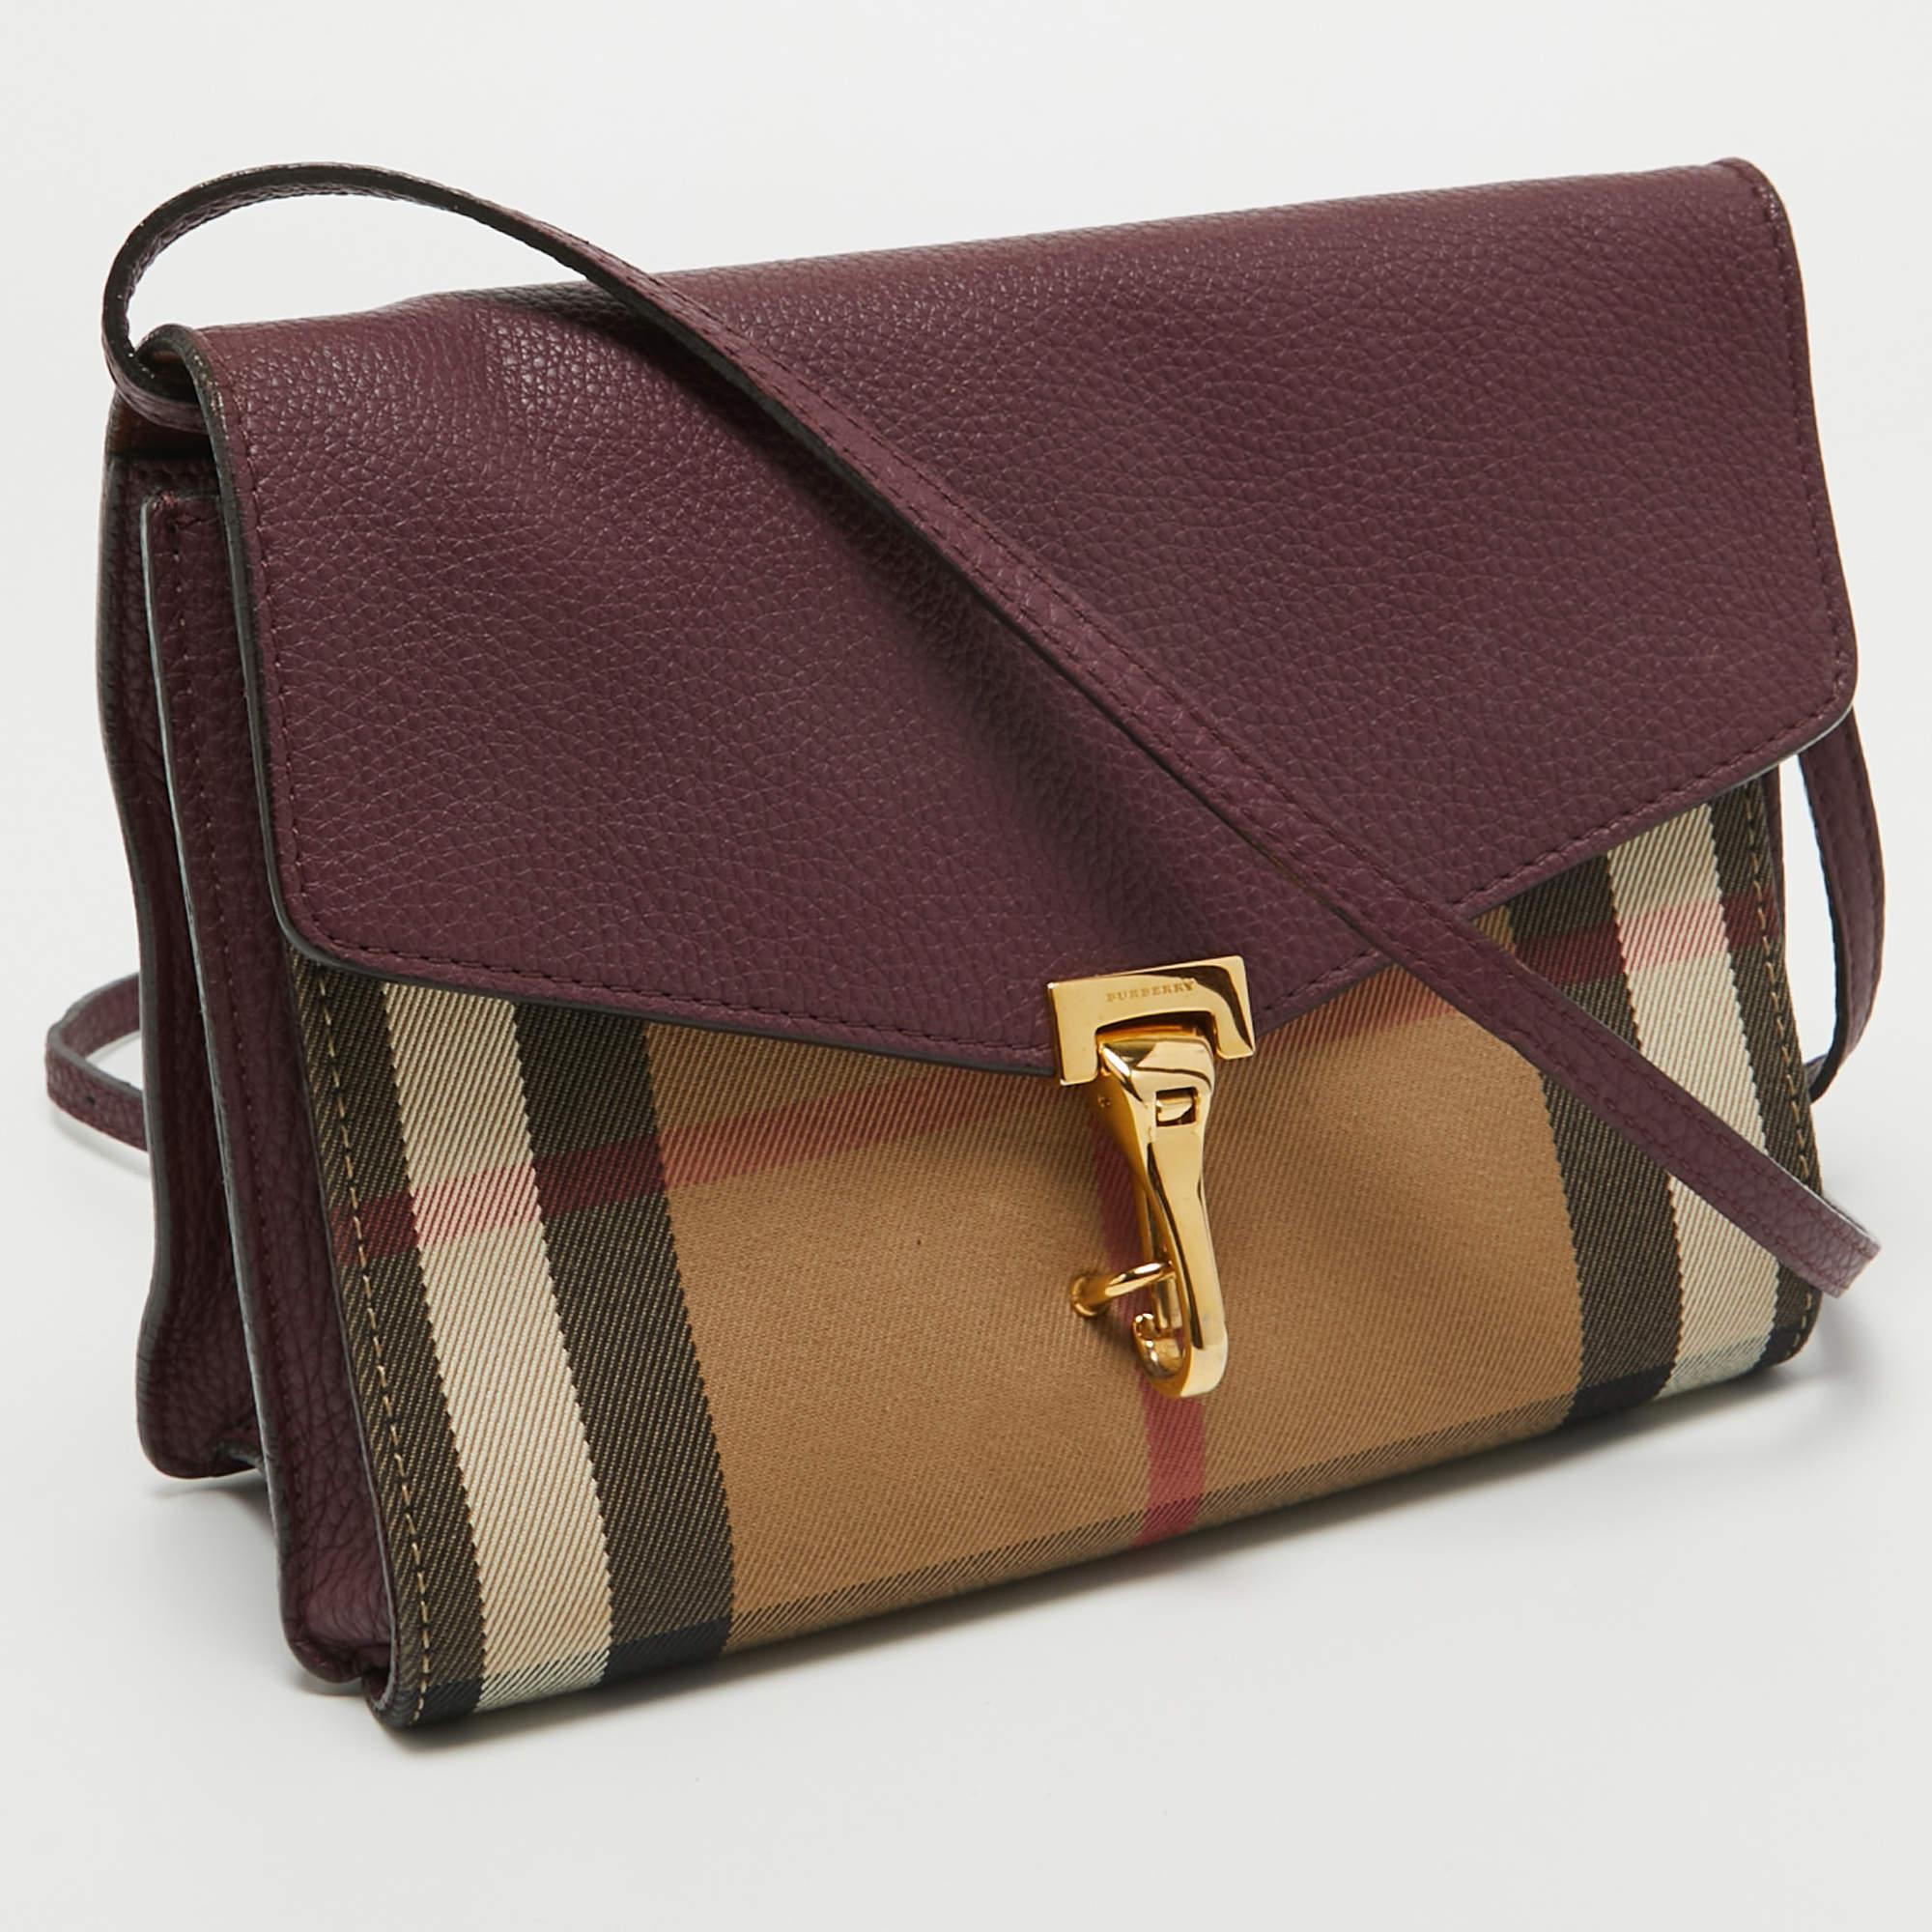 Showcasing a timeless design and durable construction, this Macken crossbody bag from Burberry offers style and sheer practicality. It's a versatile piece crafted with House Check canvas and leather and detailed with a Gold Tone clasp on the flap.